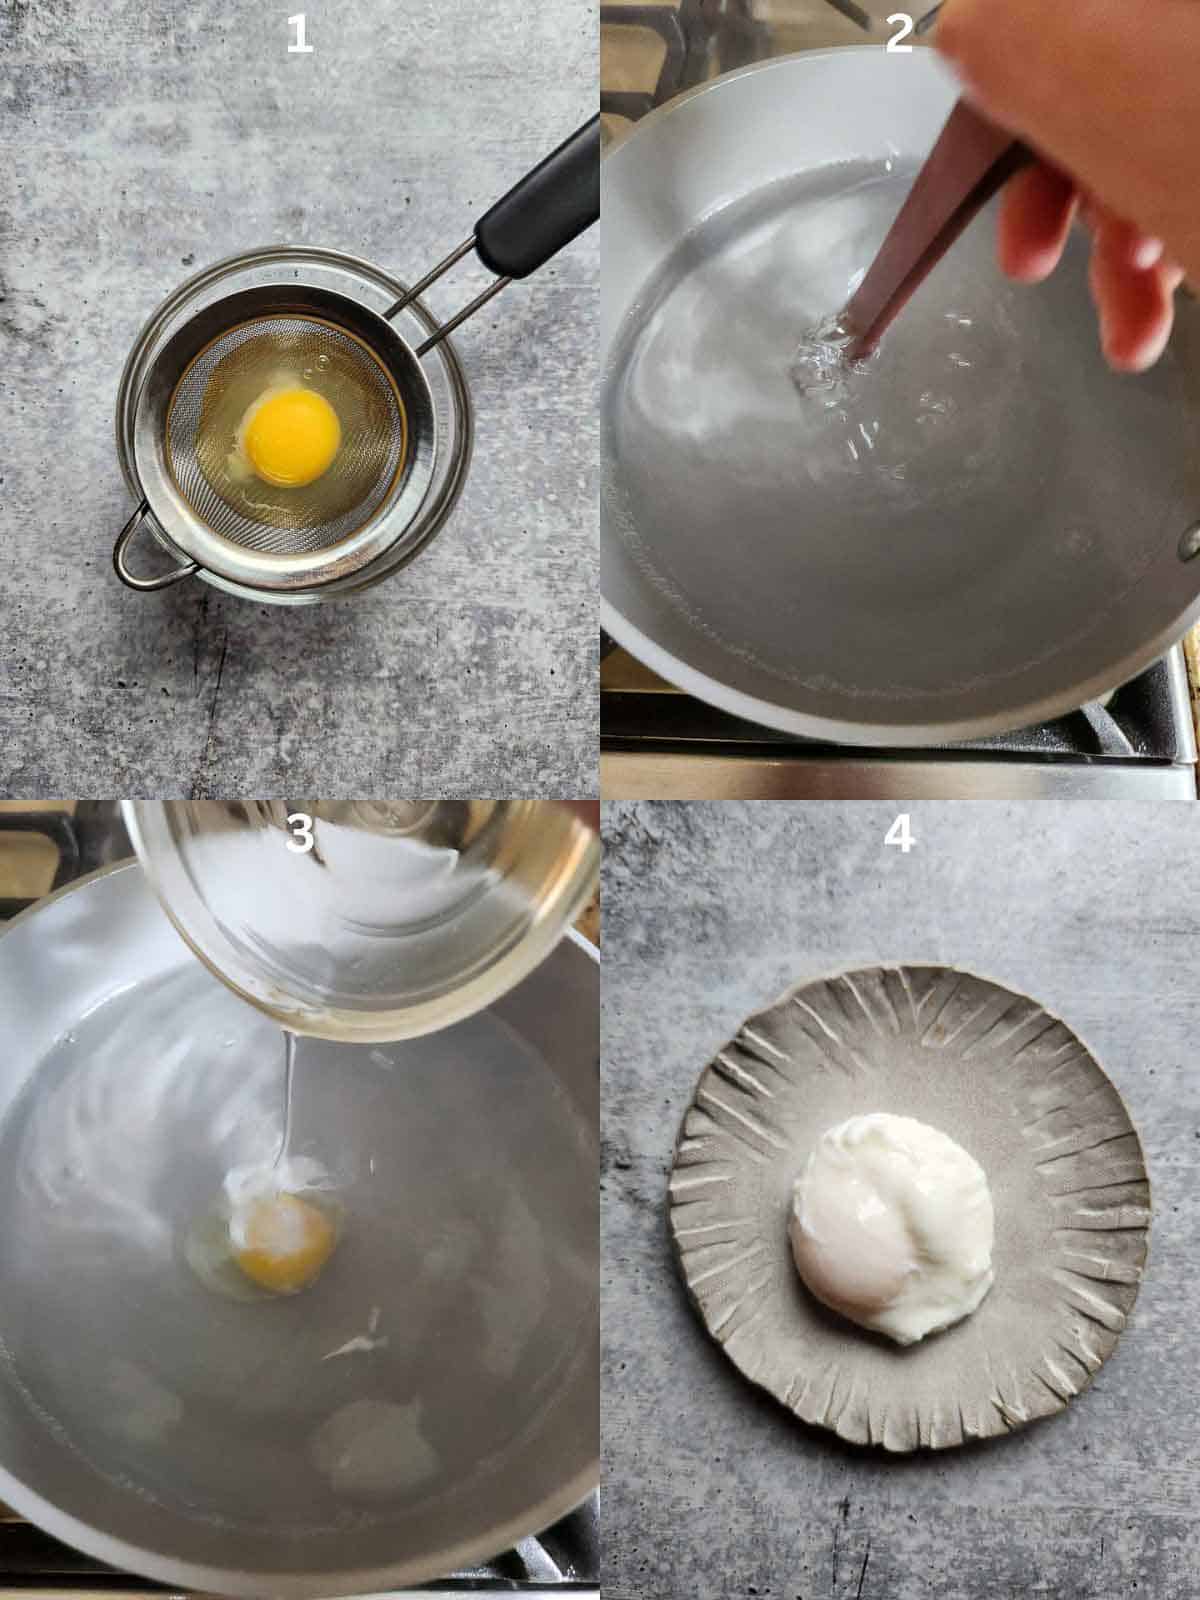 Collage of 4 images showing how to poach an egg.